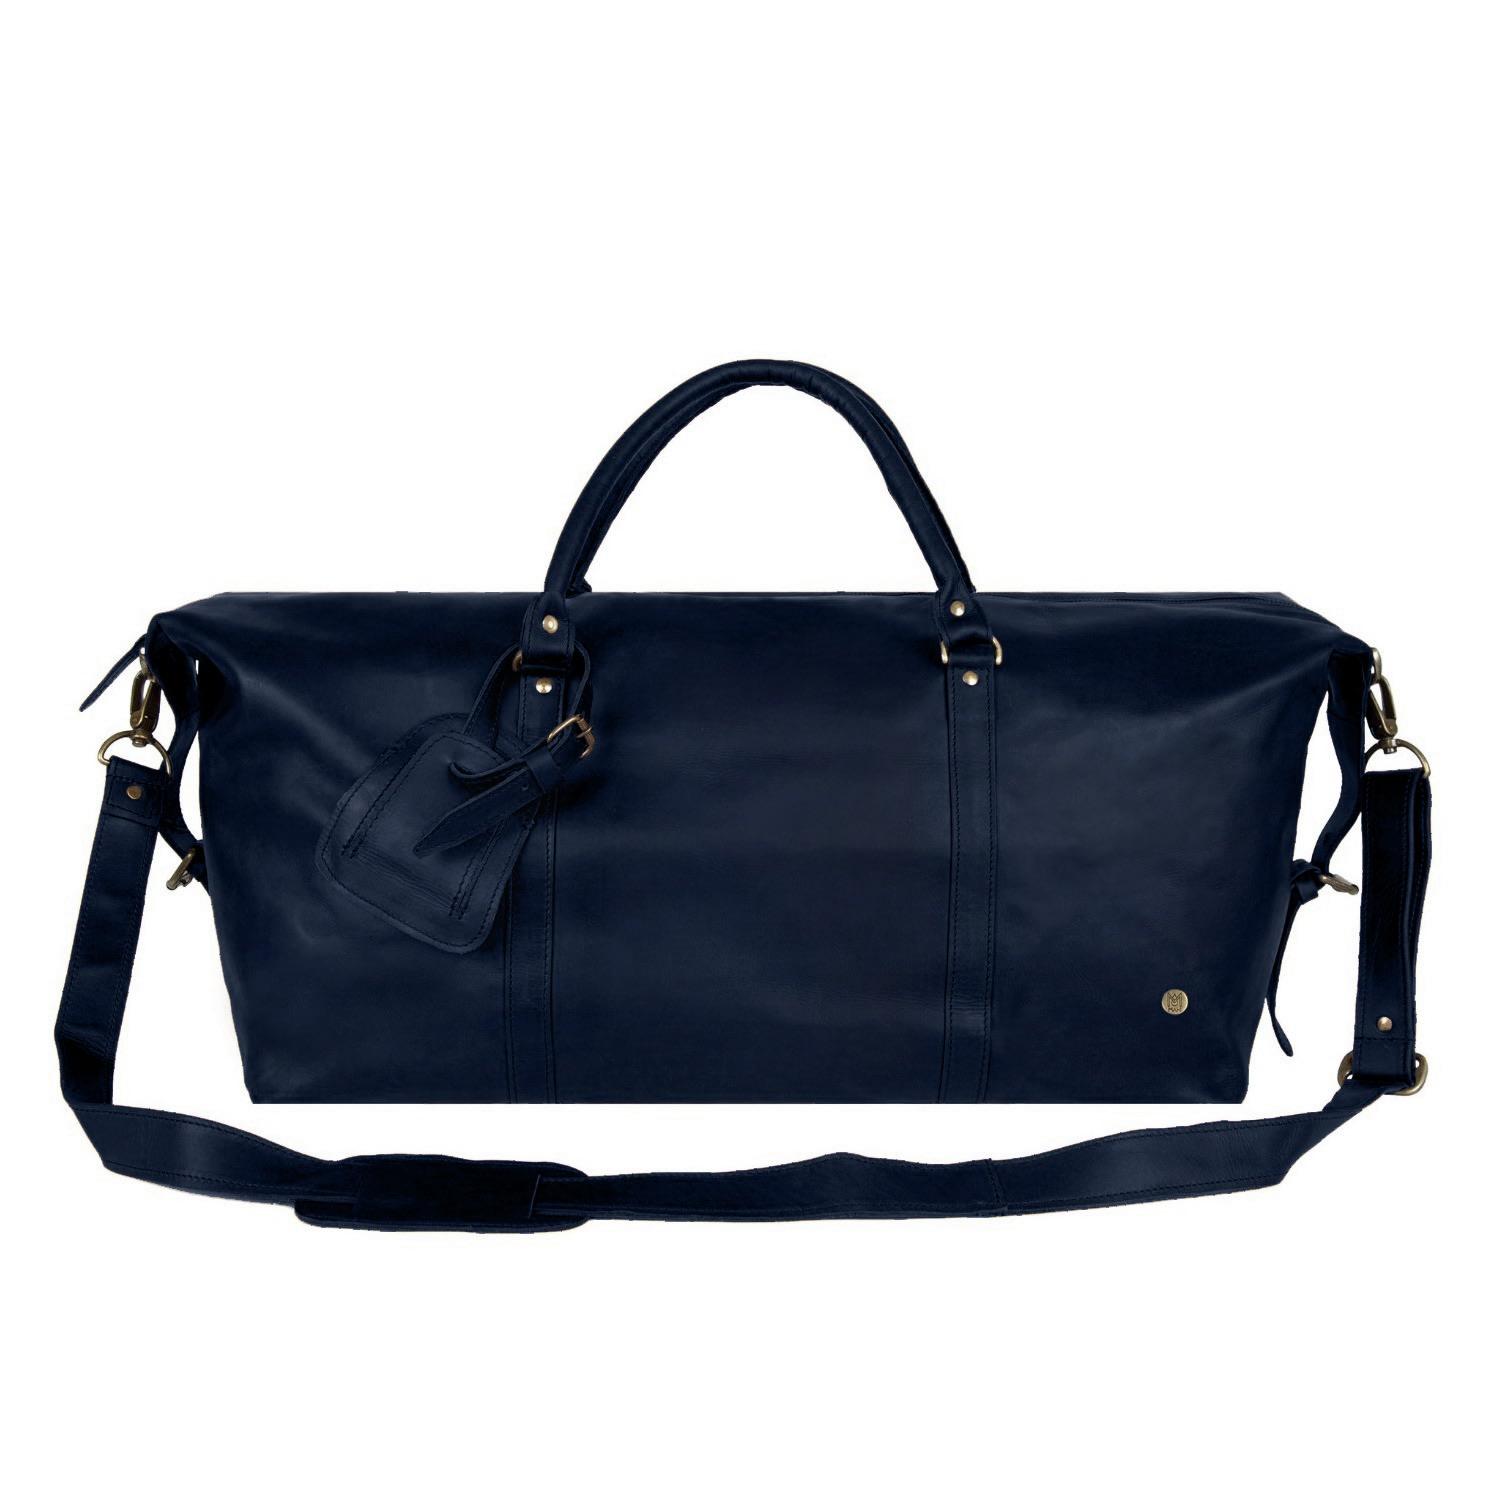 MAHI Leather Long Armada Duffle Weekend Holdall Bag In Navy in Blue for Men - Lyst